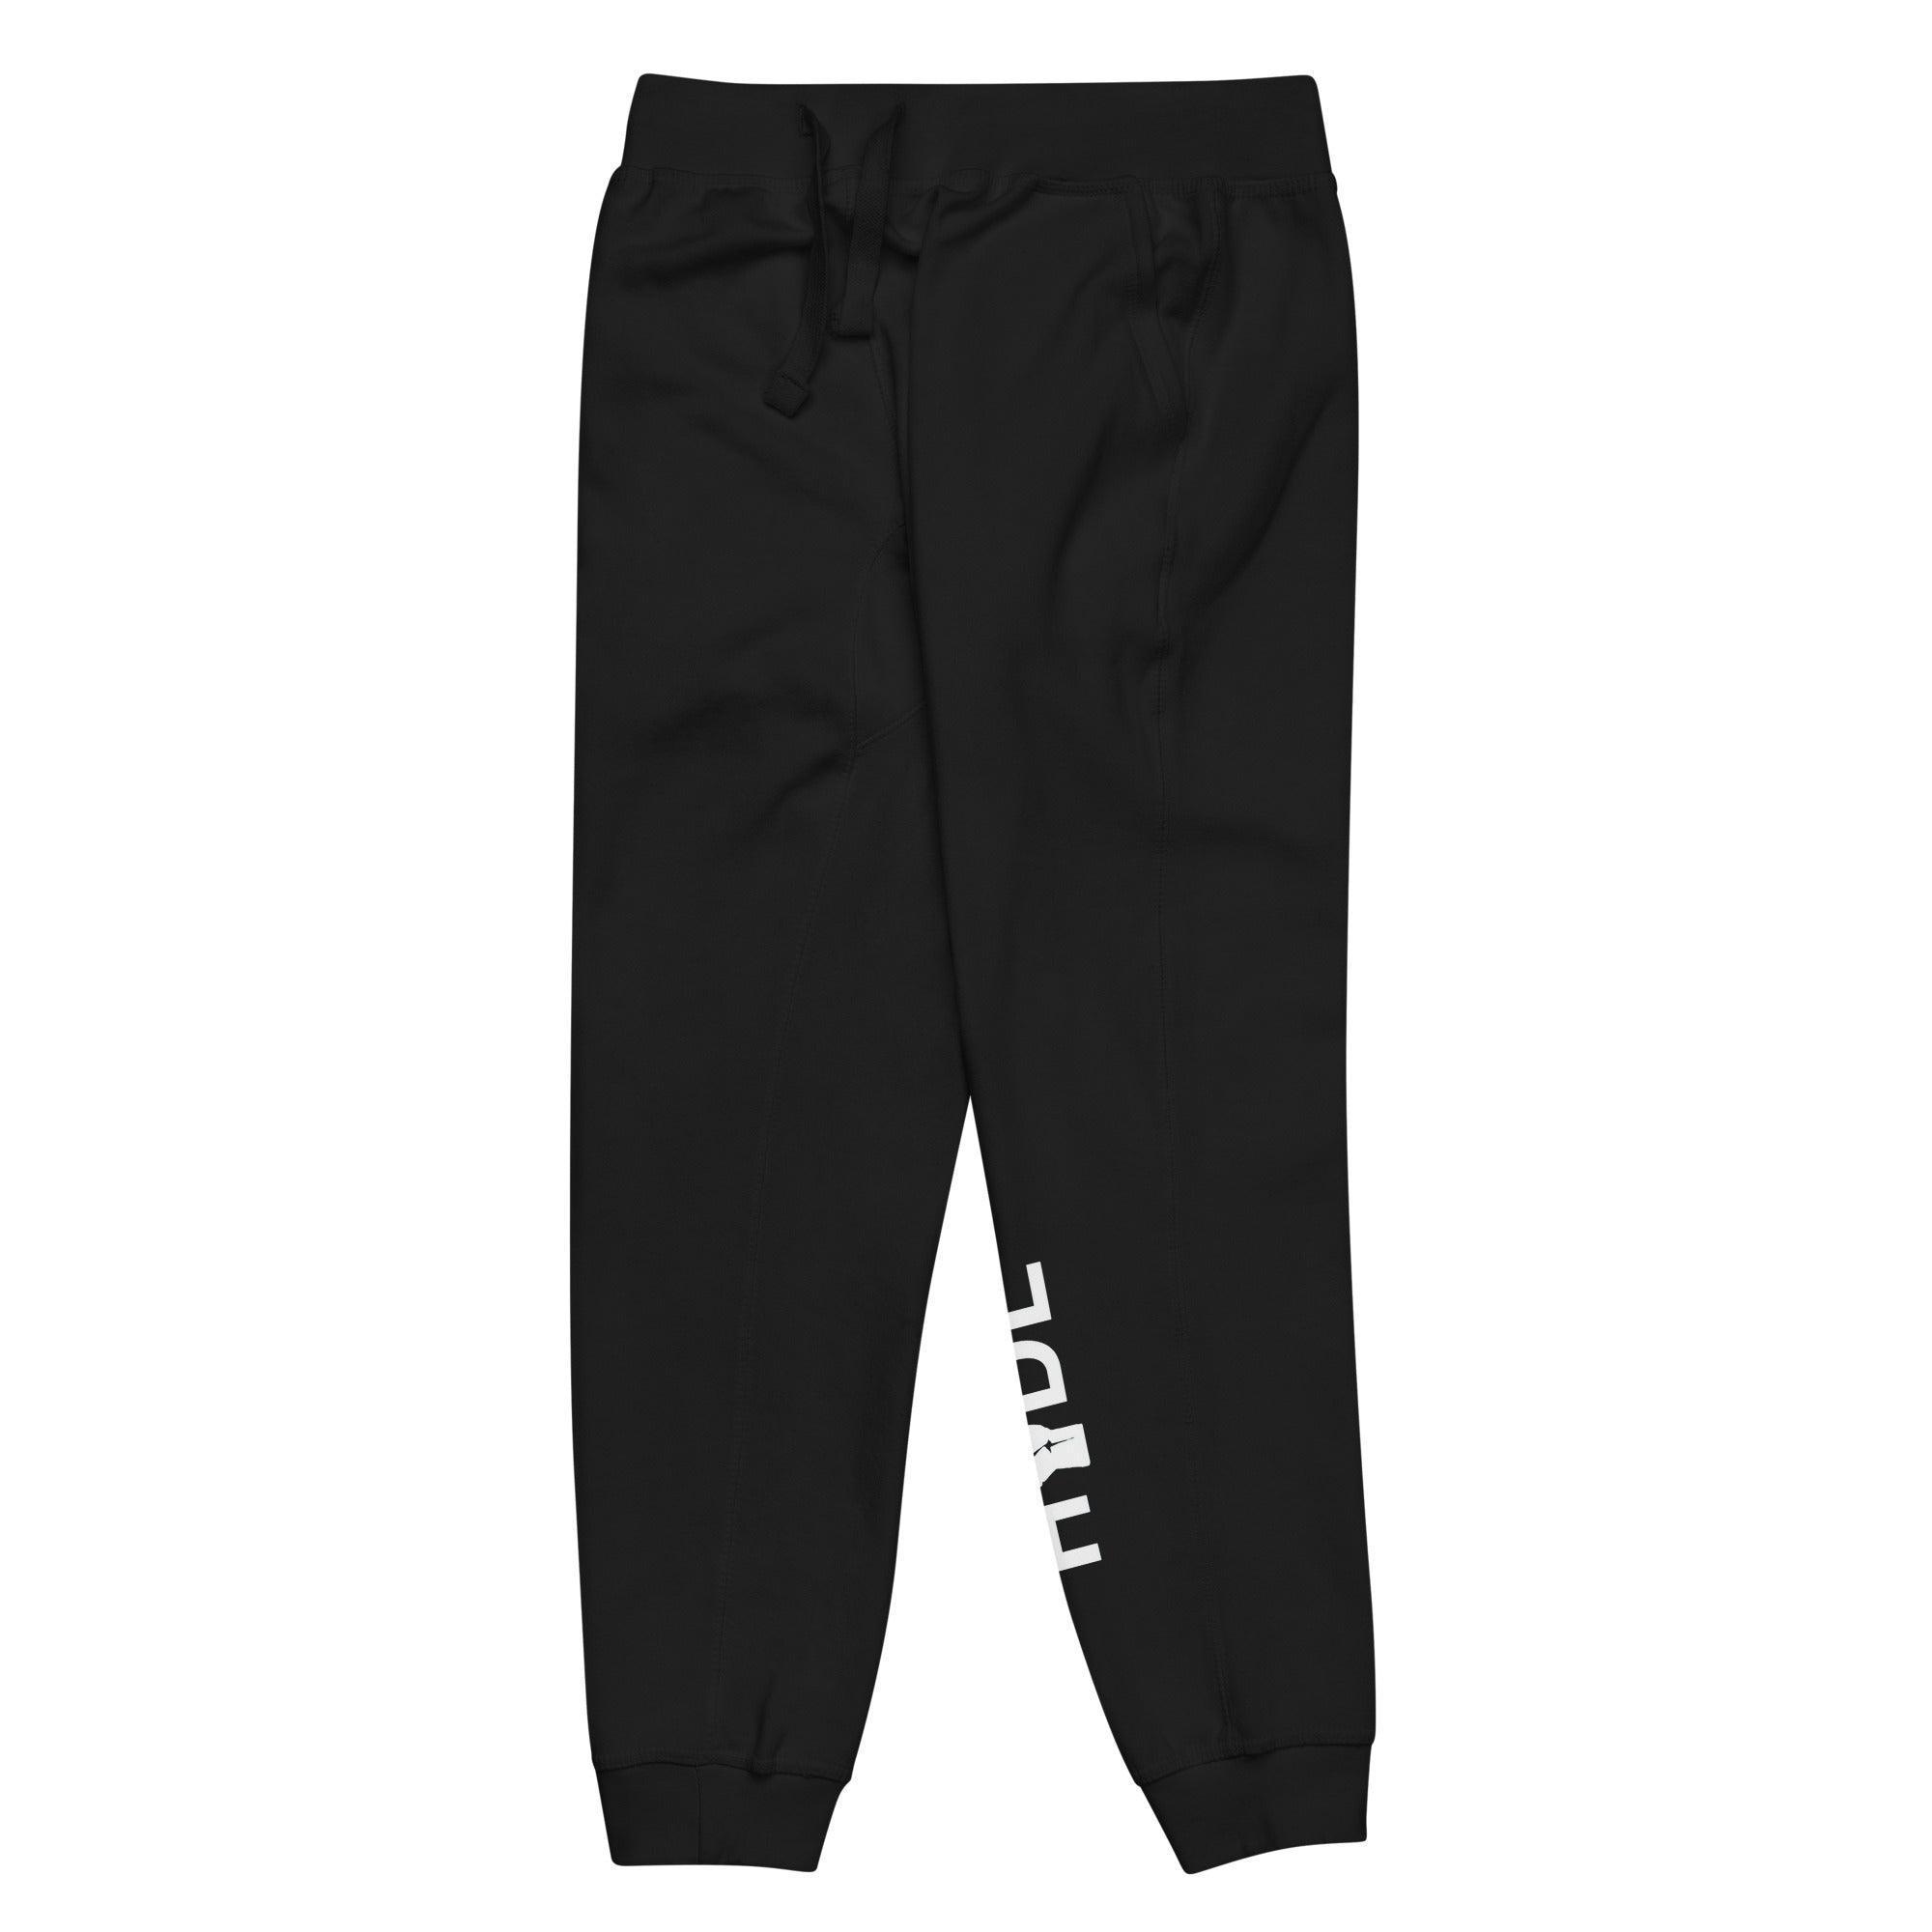 HODL Strong Sweatpants - InvestmenTees